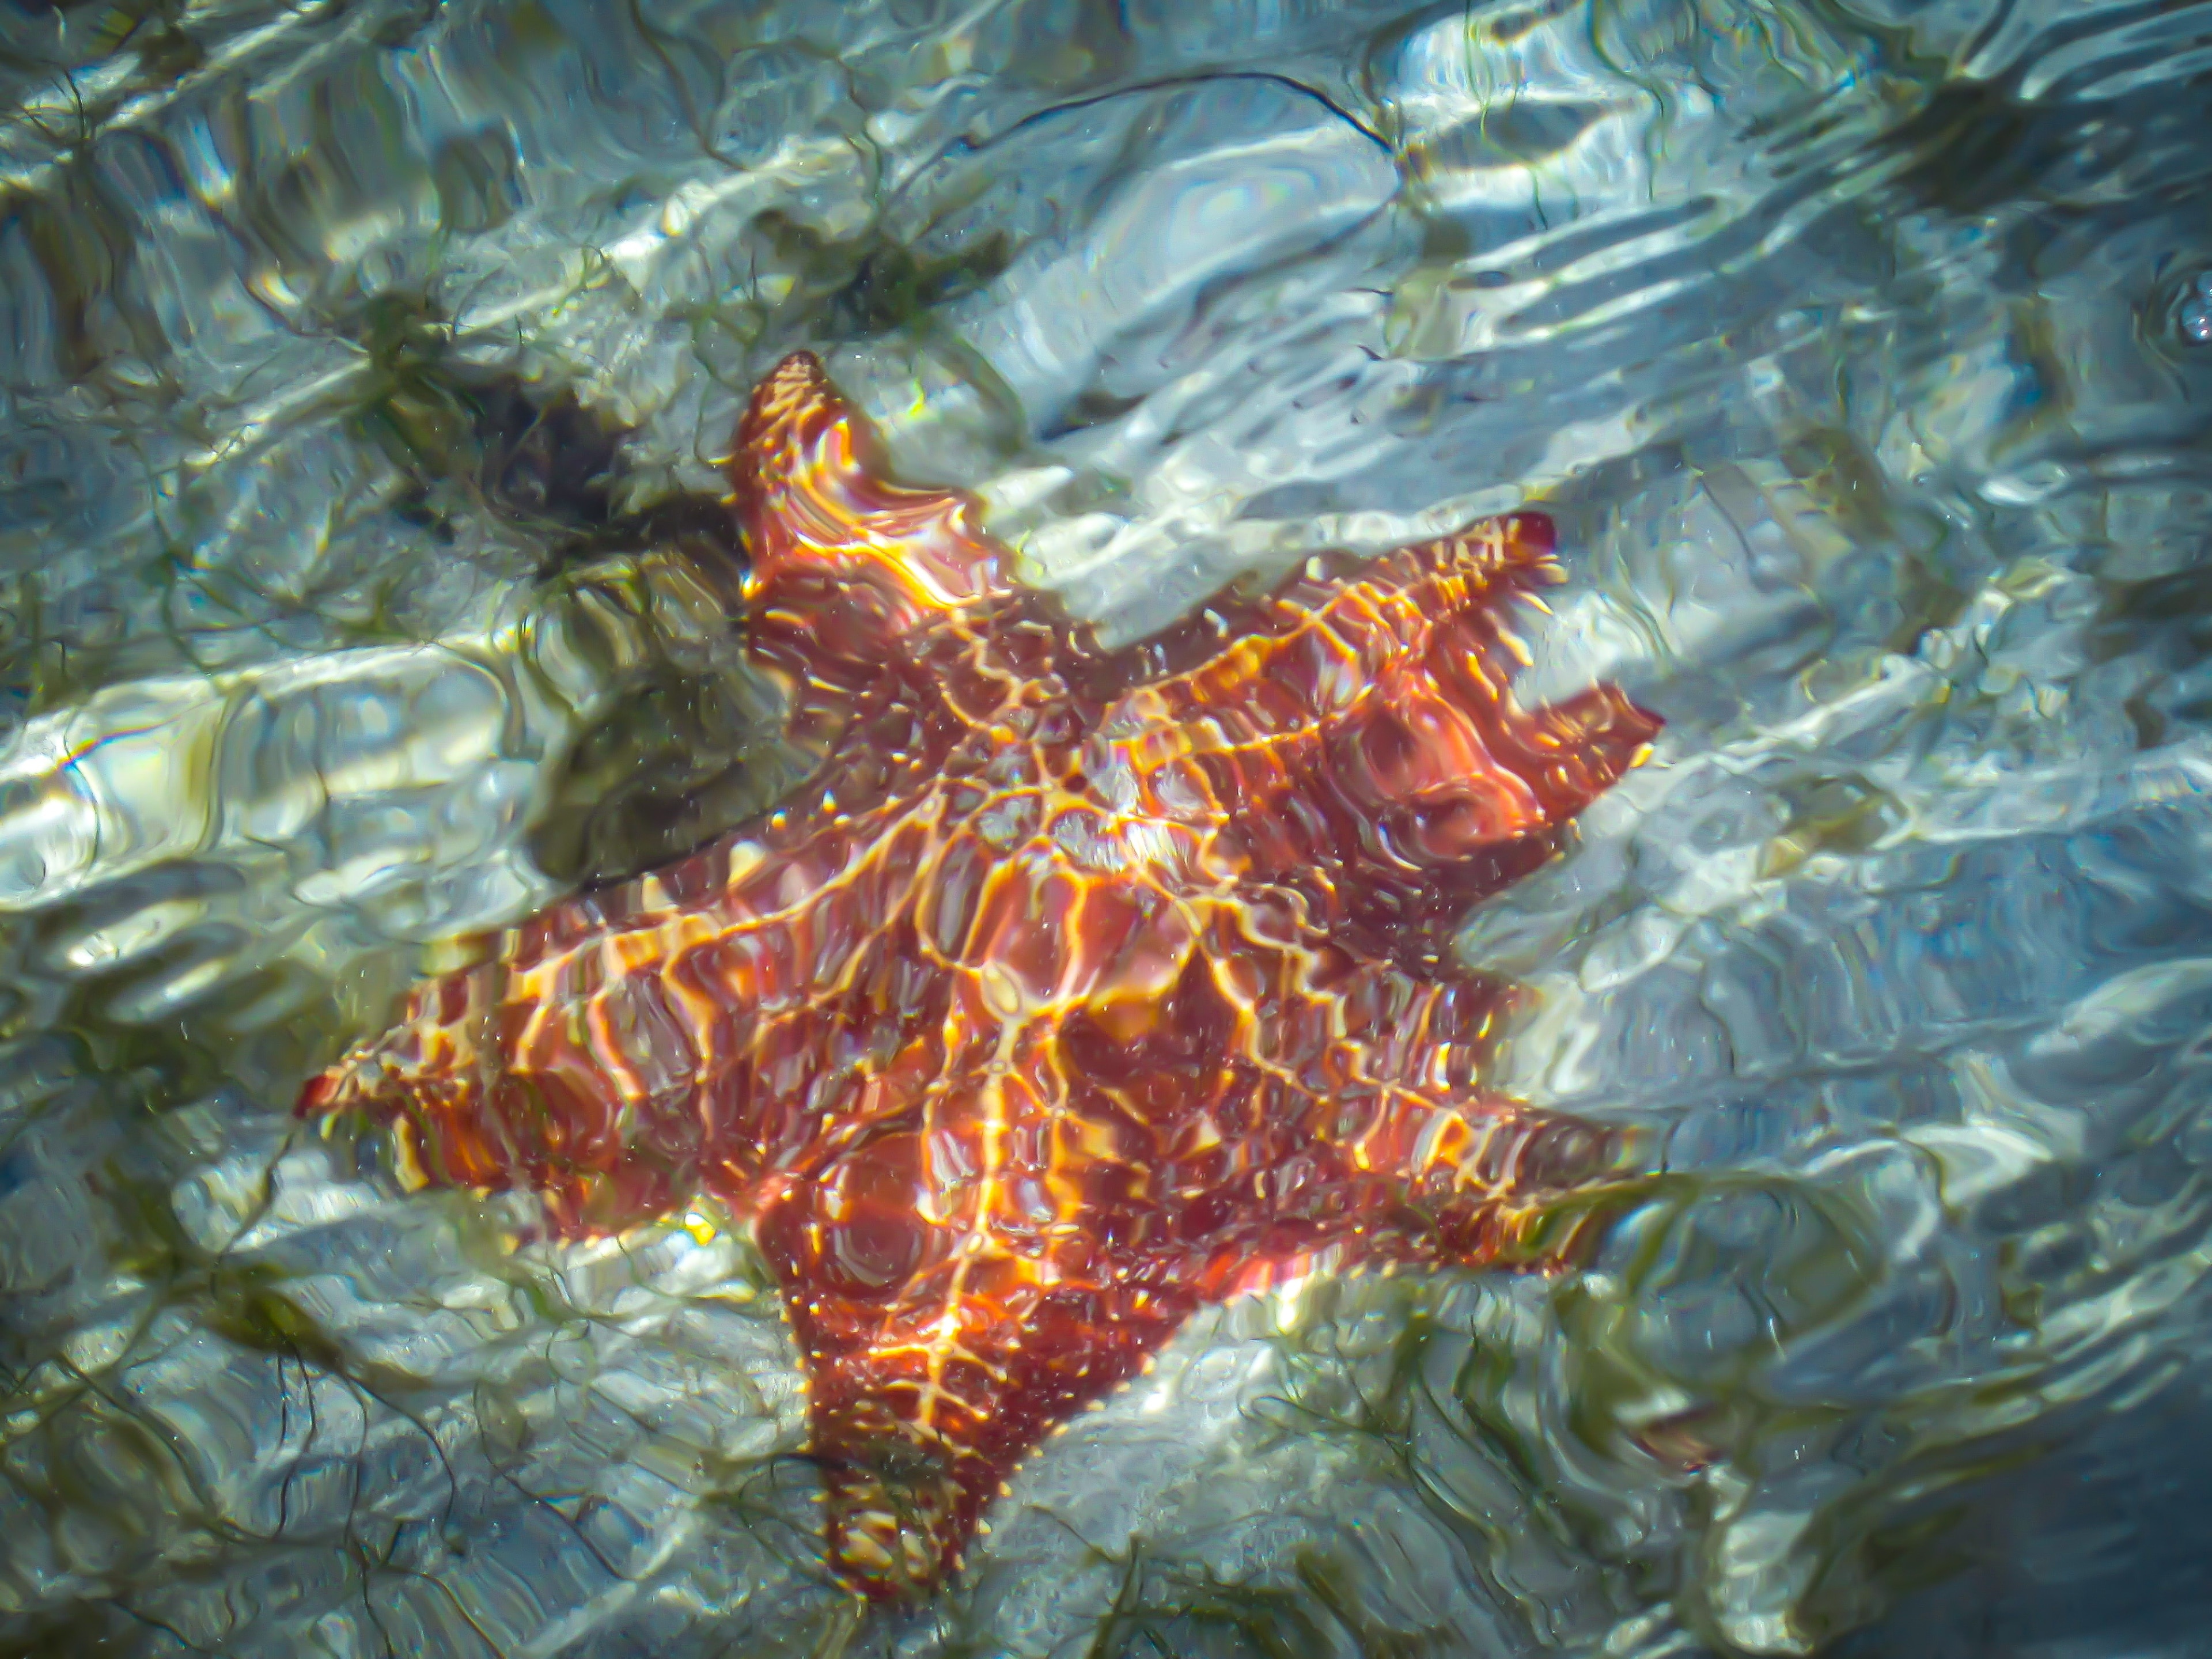 Starfish beach in Panama, really lives up to its name, with hundreds of starfishes all over its white sand with blue/transparent water. If you ever go there please don't pick them up and be careful not to step on them #nature. 